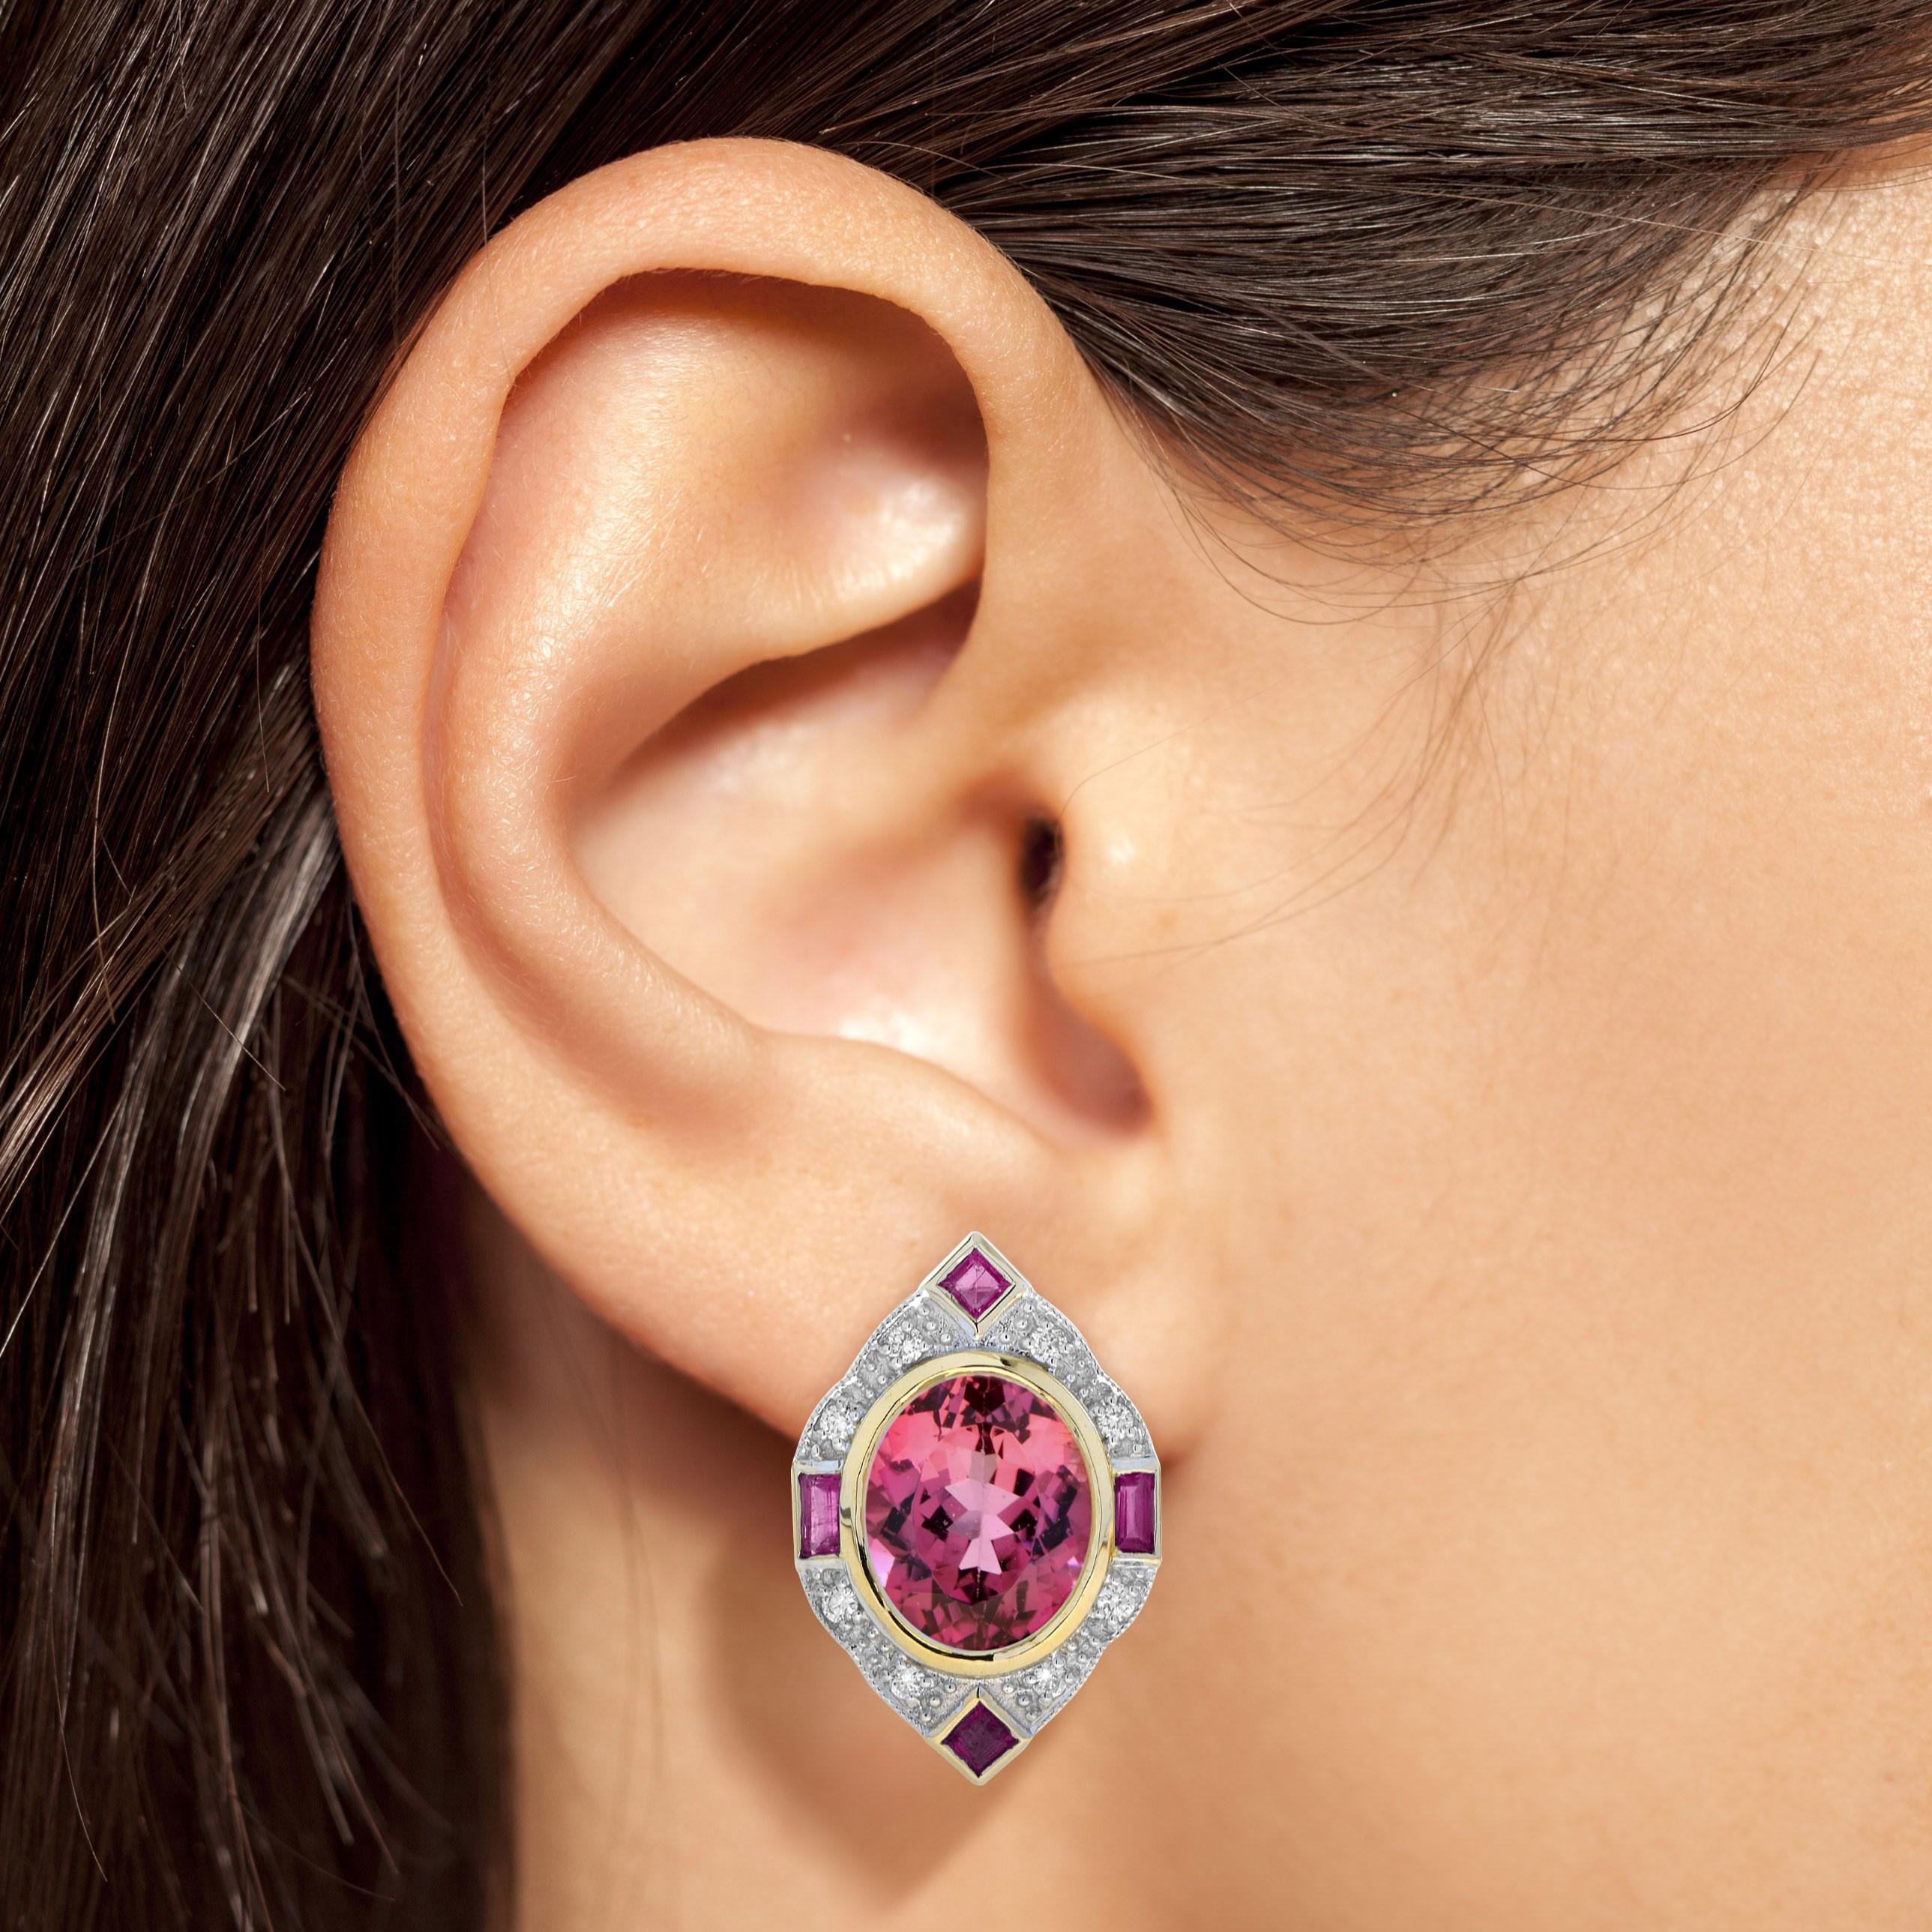 Crafted in 14k rose gold, this fanciful, Art Deco inspired earrings sees a raised an opulent total of 10.48 carat oval but bright pink tourmaline surrounded by sparkling round diamonds and rubies. This charming piece is a winsome adornment perfect